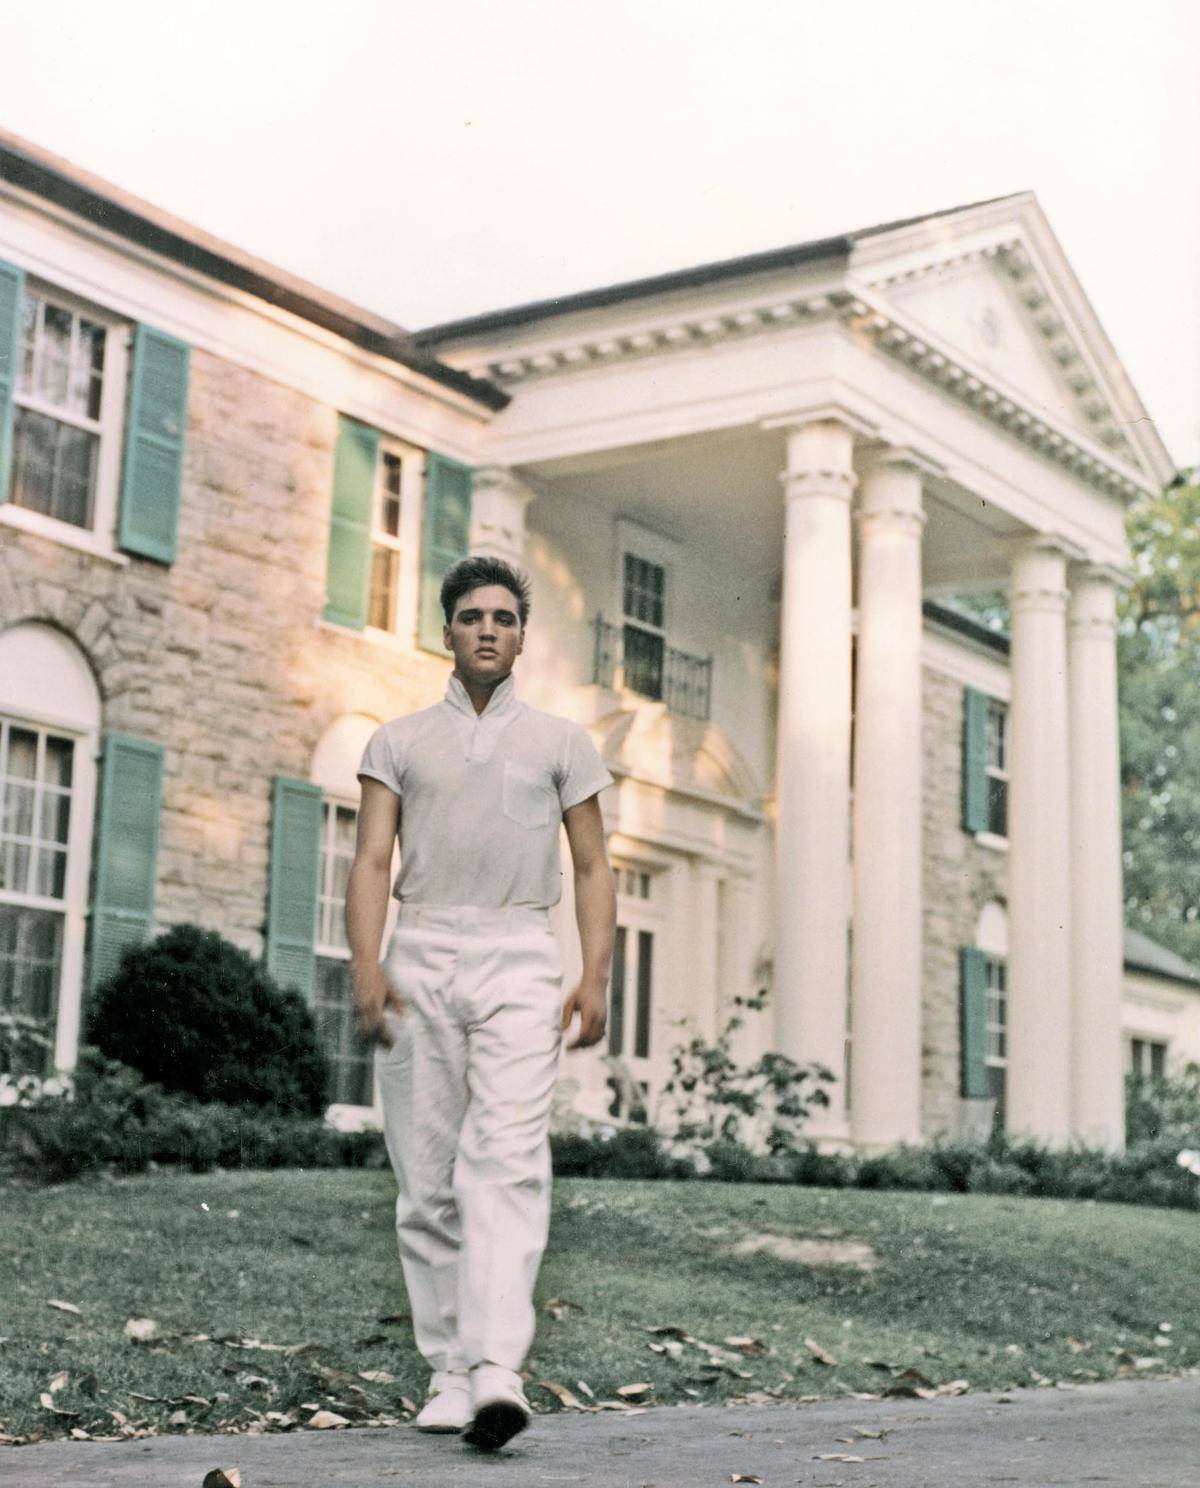 <p>Elvis purchased the historical mansion called Graceland in 1957 for $102,500. Built in 1939, the Colonial Revival style estate is located about 9 miles south of central Memphis. </p> <p>The extravagant home was outfitted with eccentricities by the King of rock, including a swimming pool in his father's room and cameras throughout the house and property that he could watch on CCTV at all hours. </p>